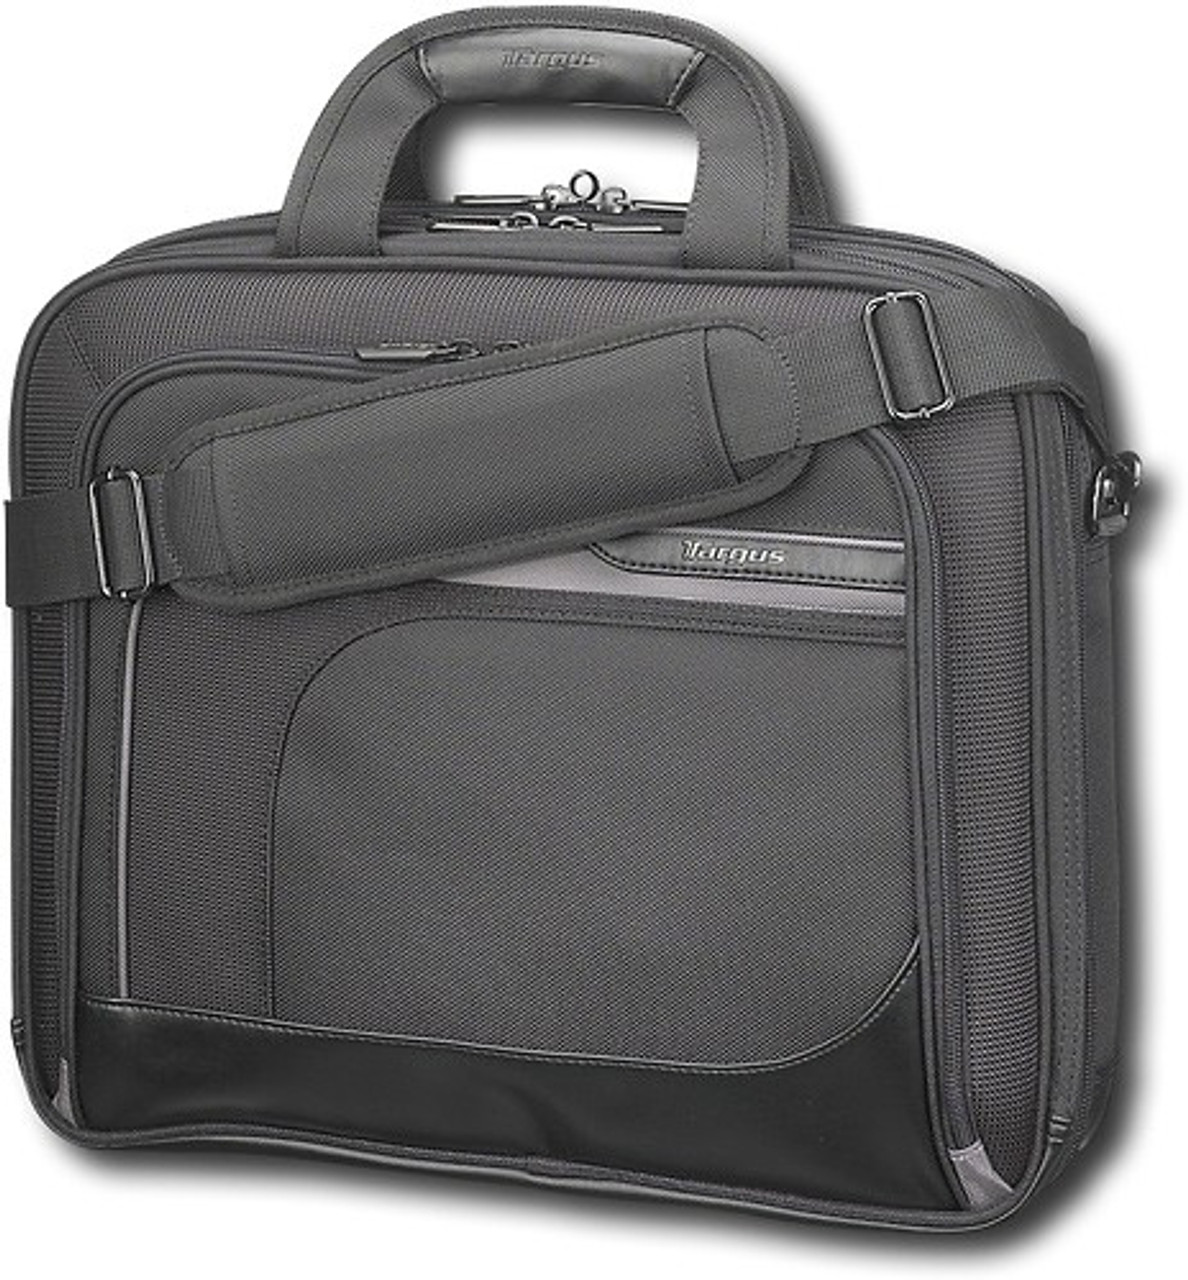 Targus - Carrying Case for 15.4" Notebook, - Black/Grey